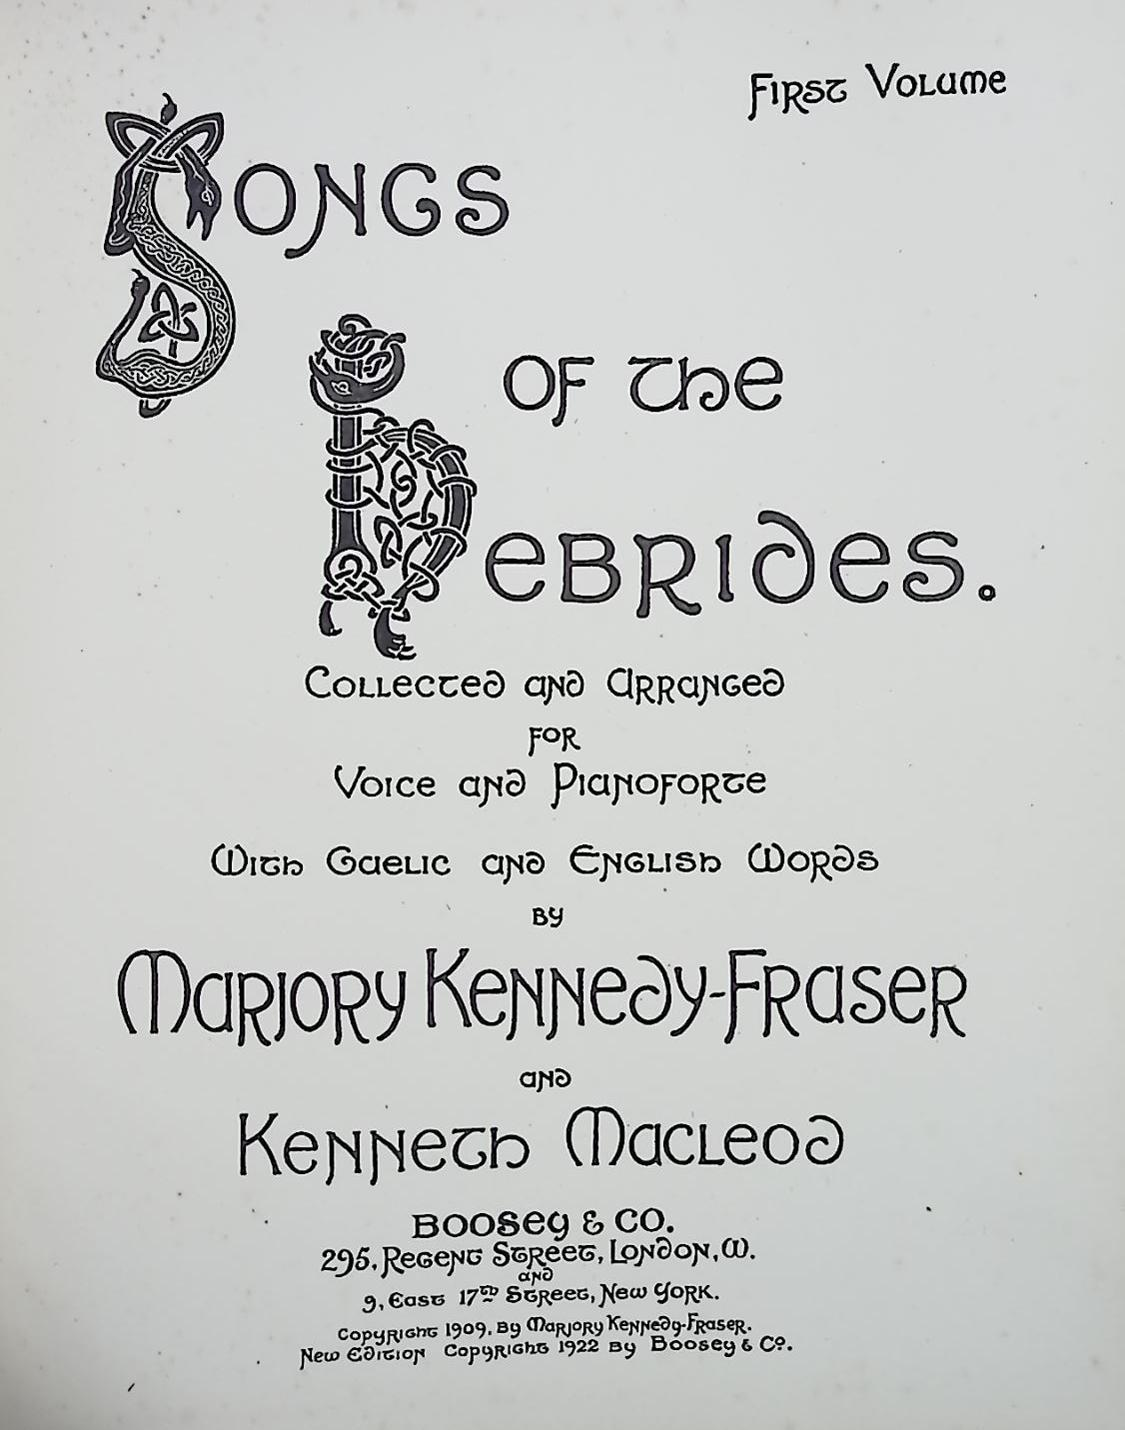 Songs of the Hebrides. Collected and Arranged for Voice and Pianoforte. 3 volume set.